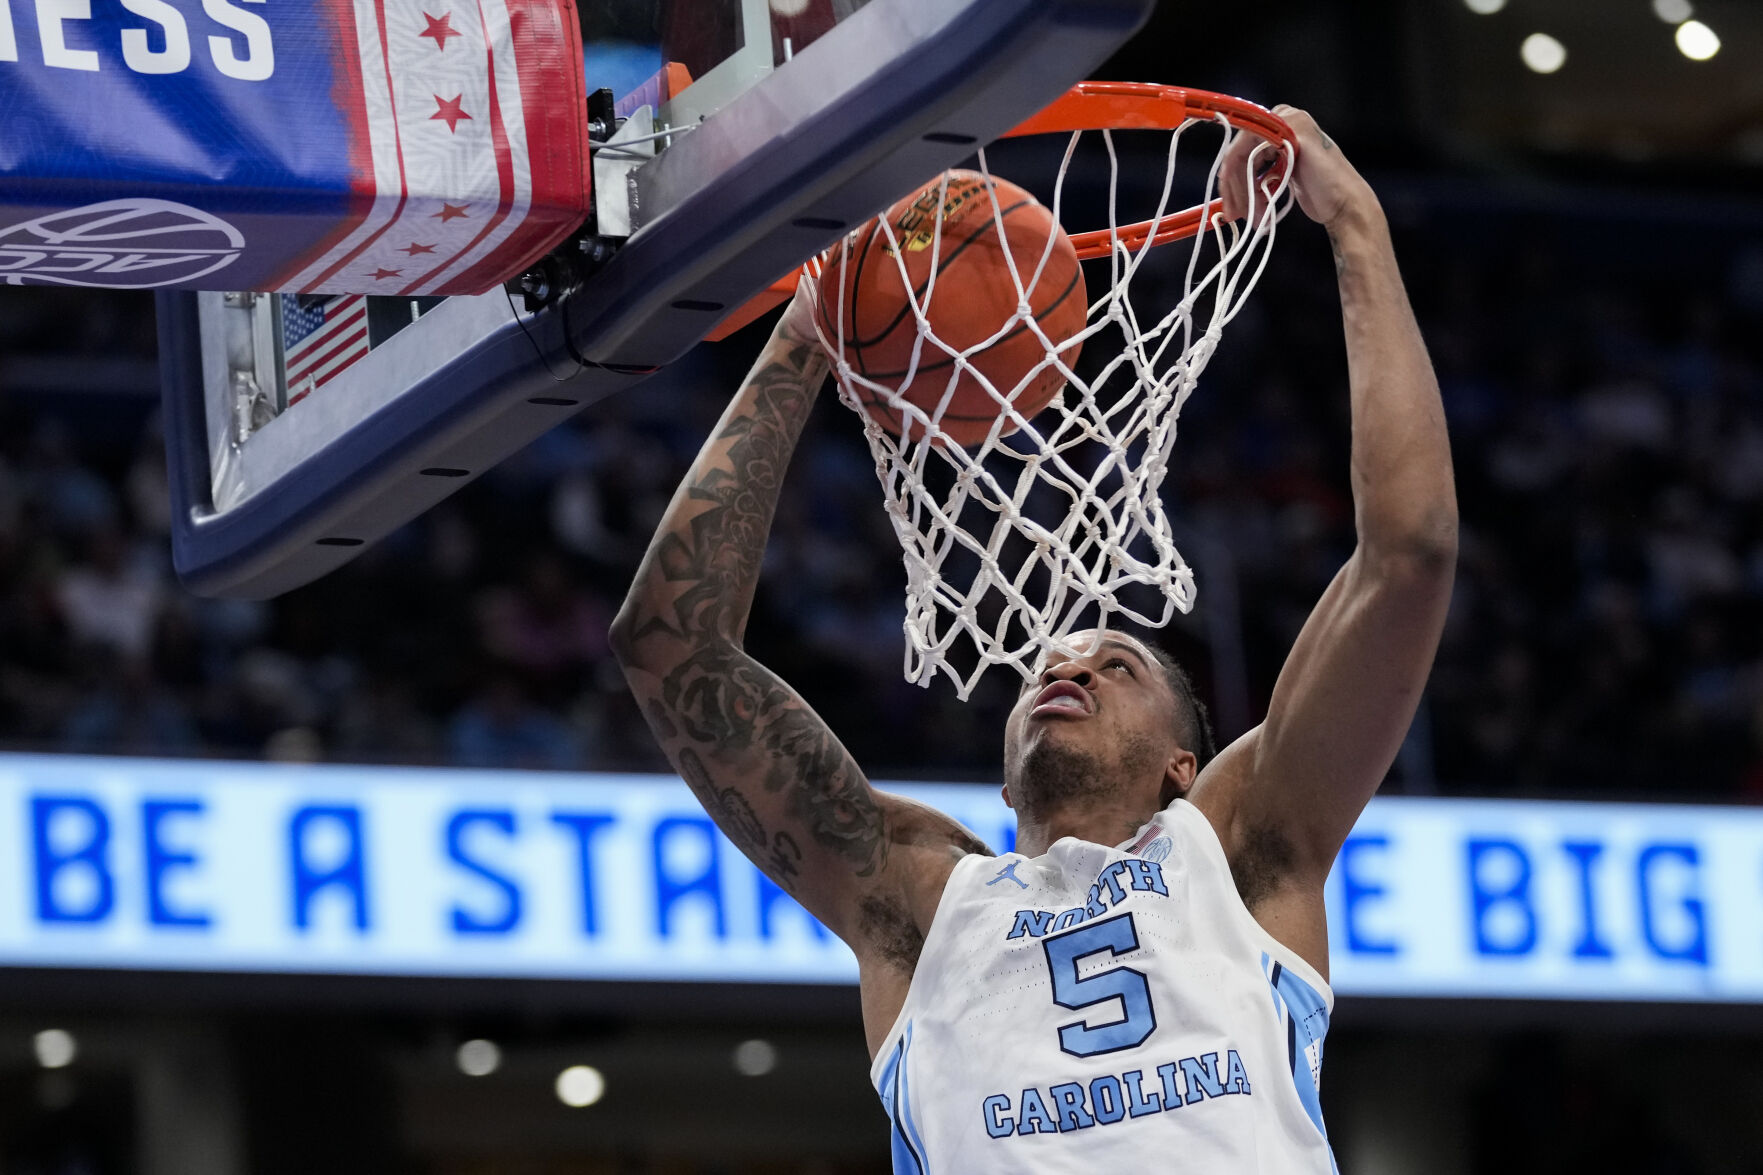 Consummate Tar Heel Armando Bacot leads UNC over Florida State in ACC tournament